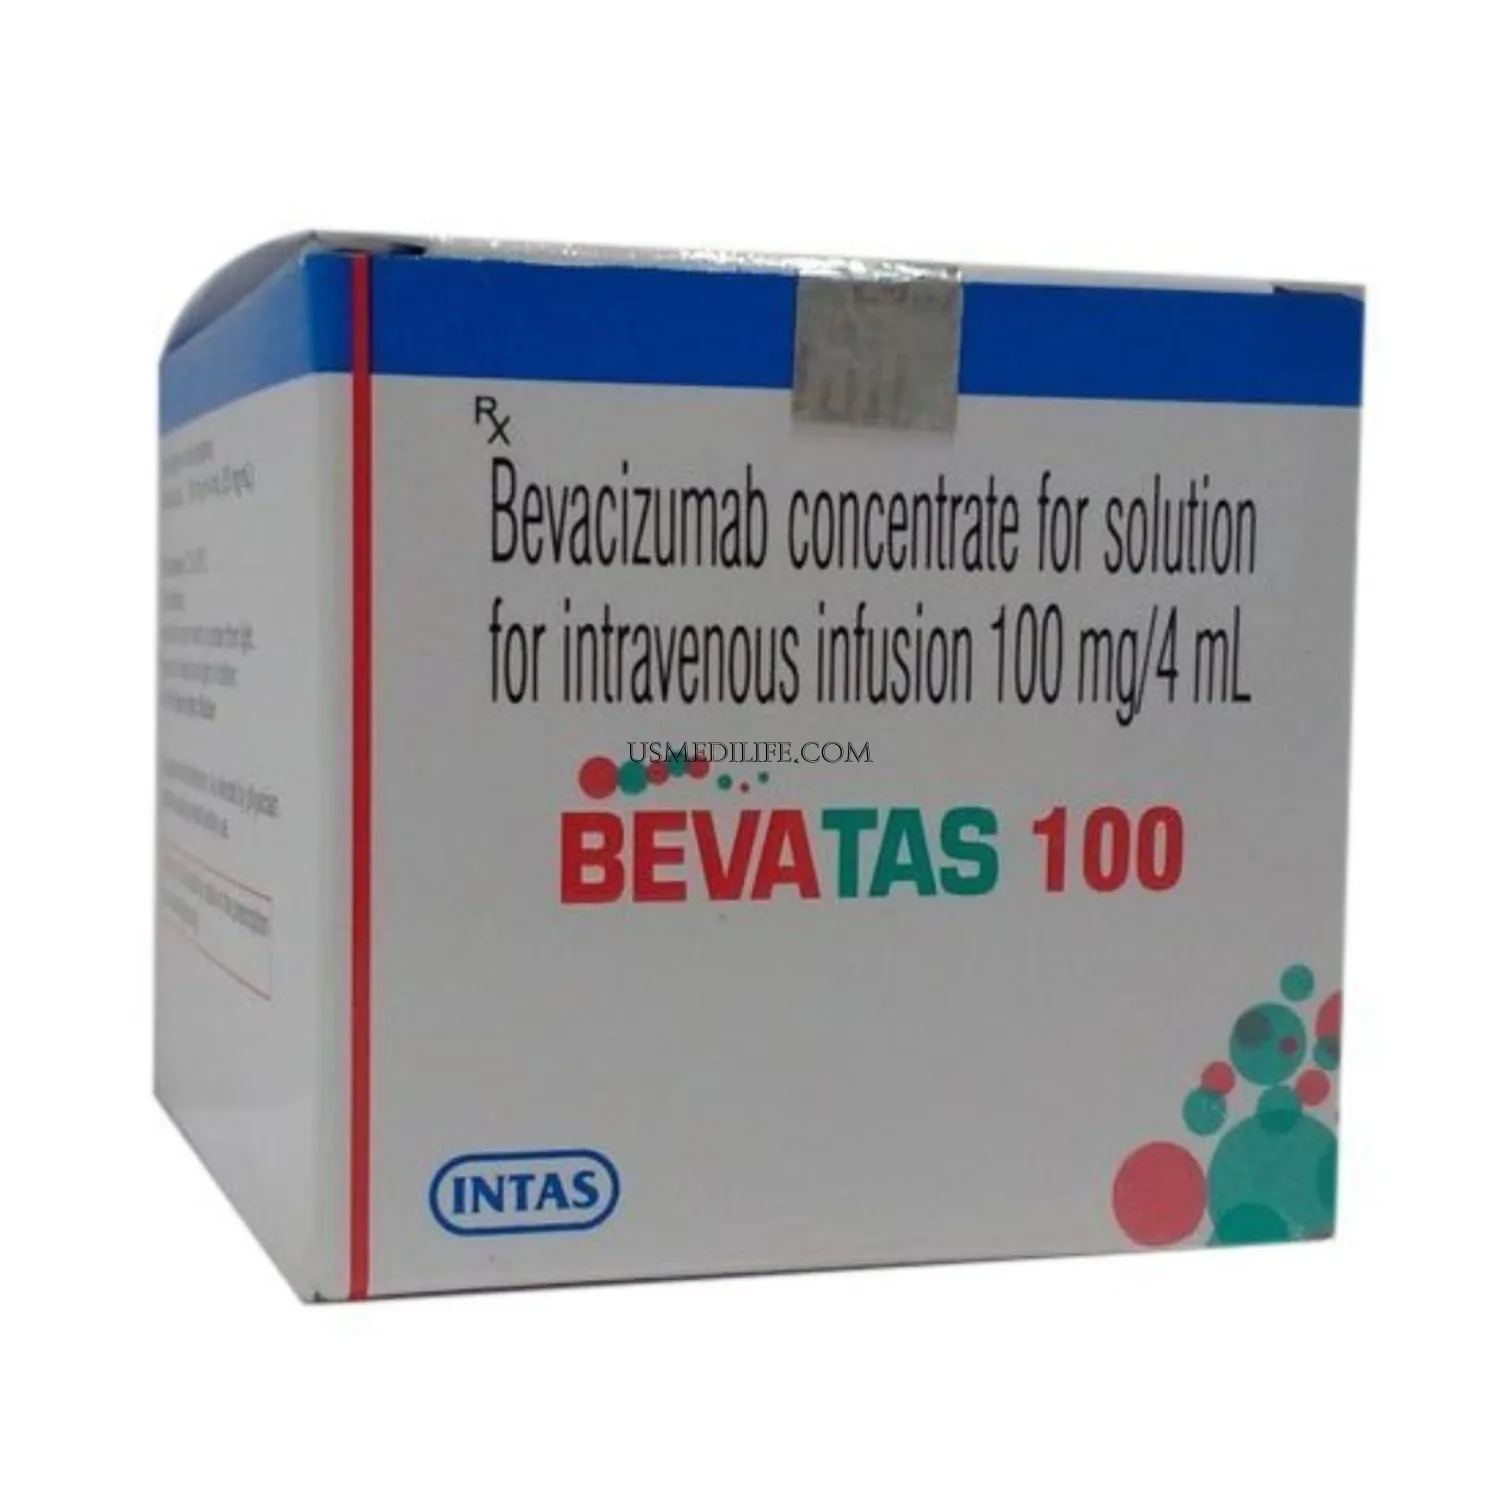 Bevatas 100 Mg Injection